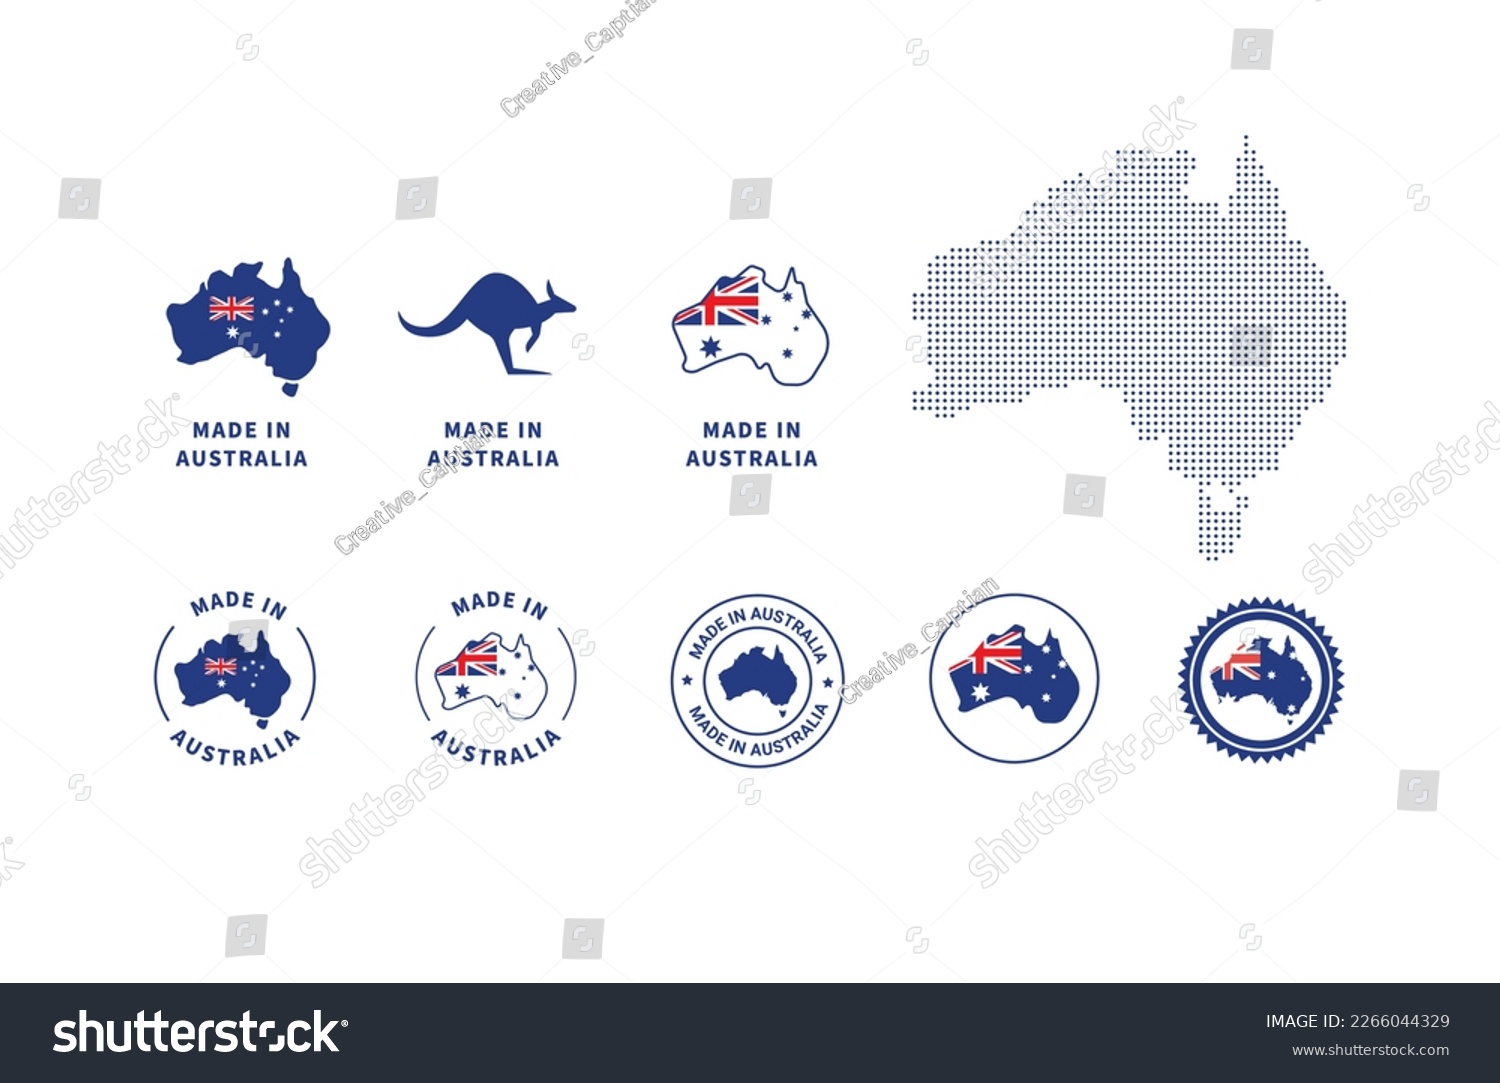 Made in Australia Color Vector Icon Set - Australian-Made Badge Symbols and Australia Outline Icon Pack. #2266044329